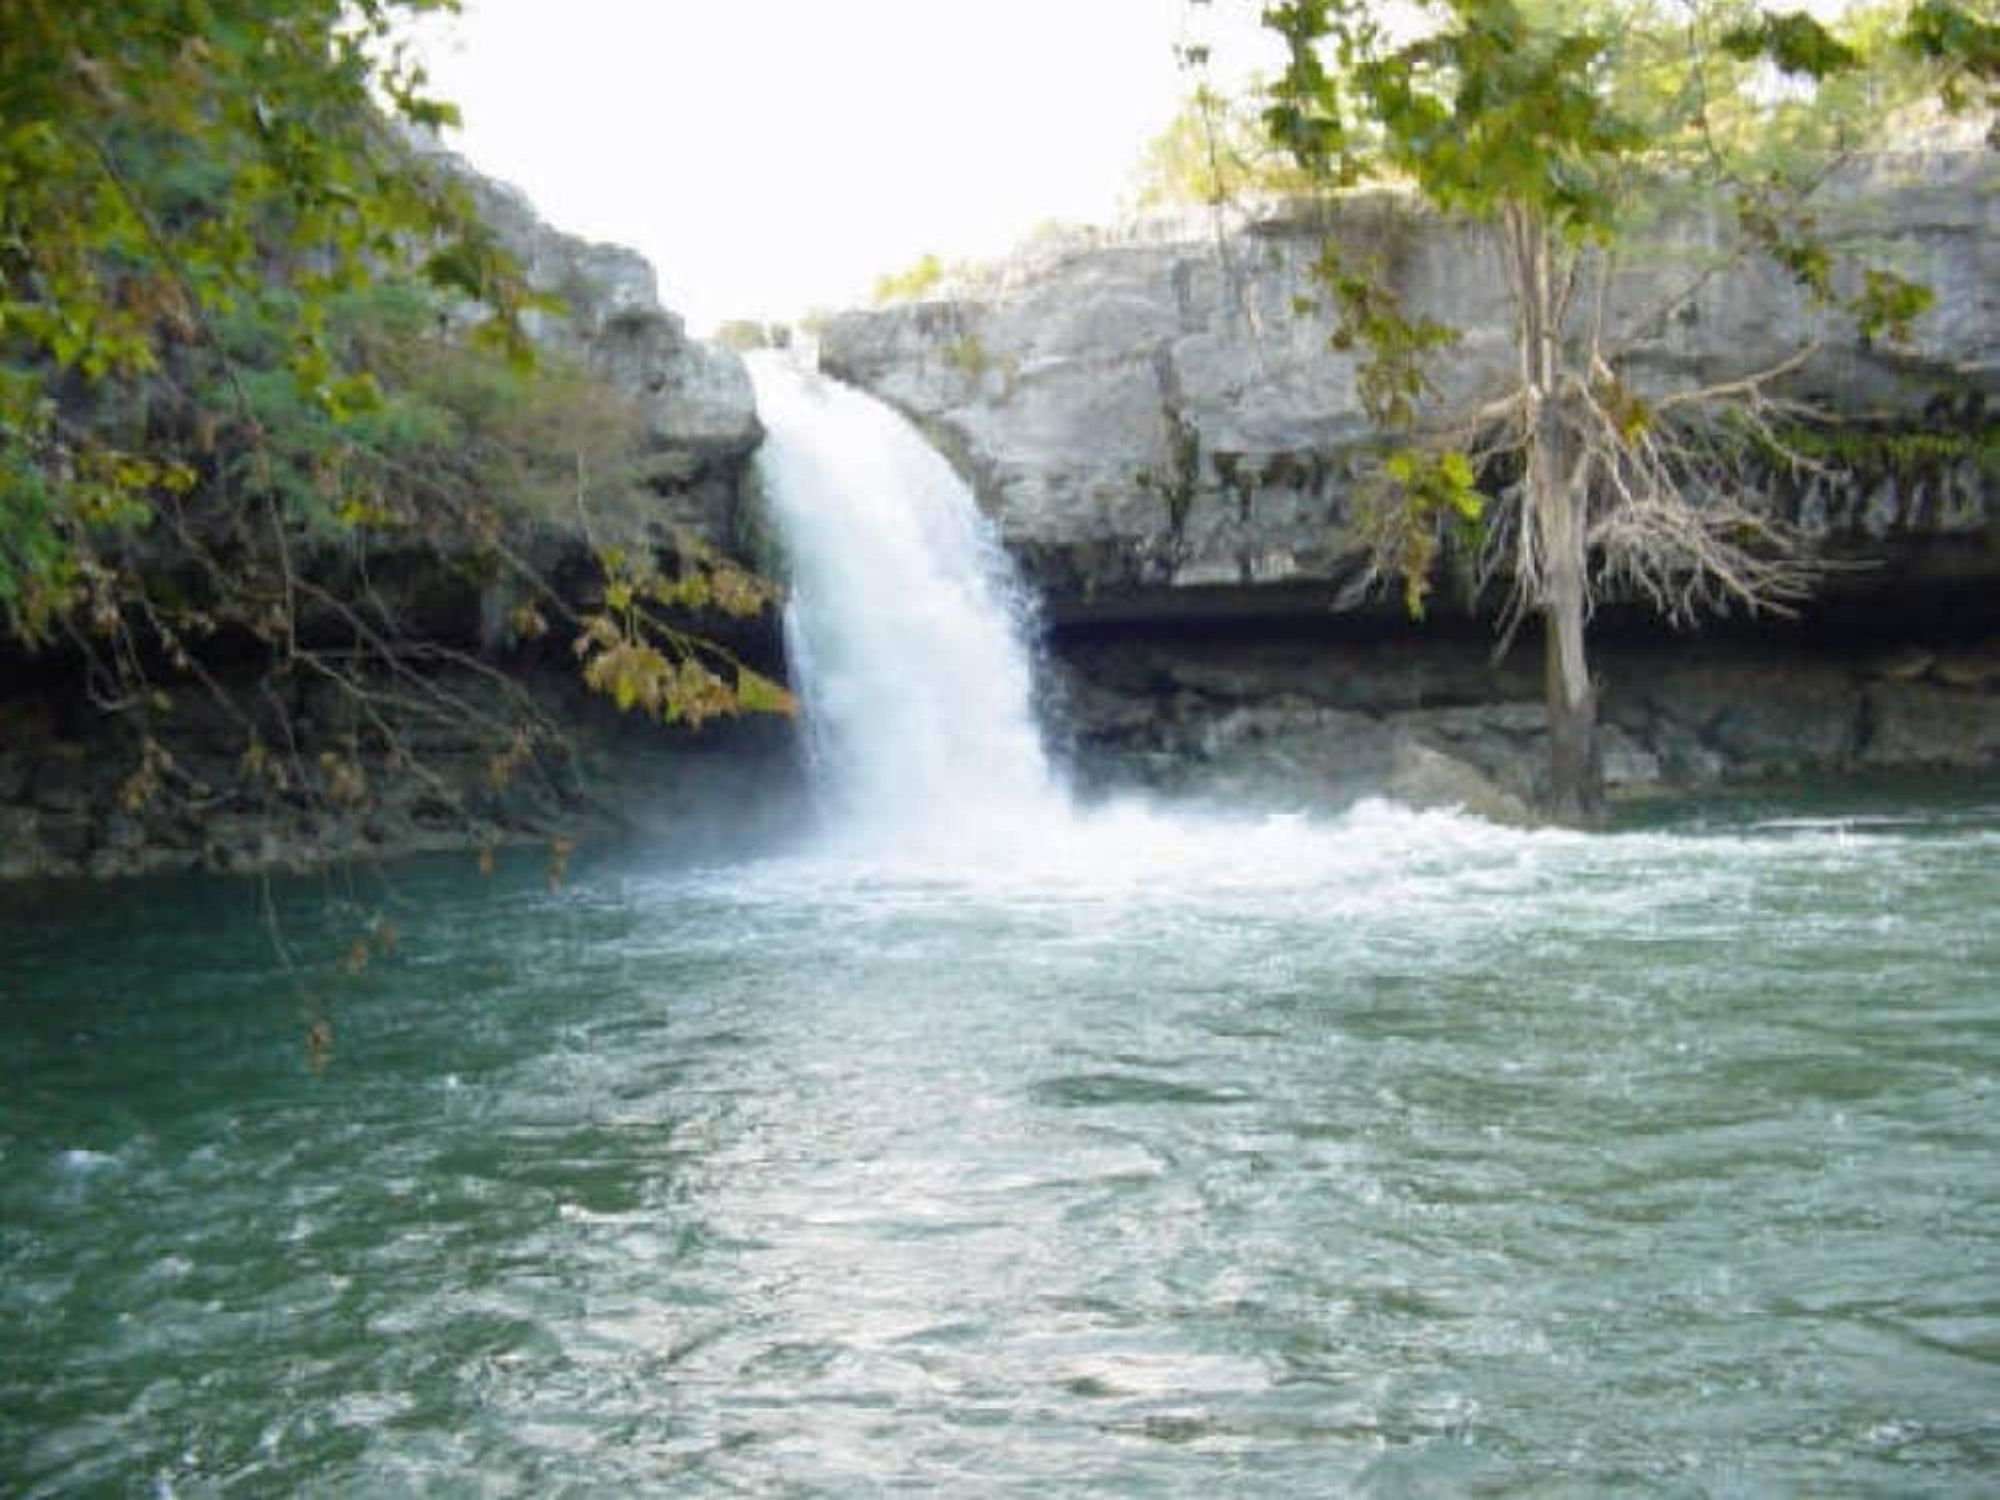 Edge Falls in Kendall County